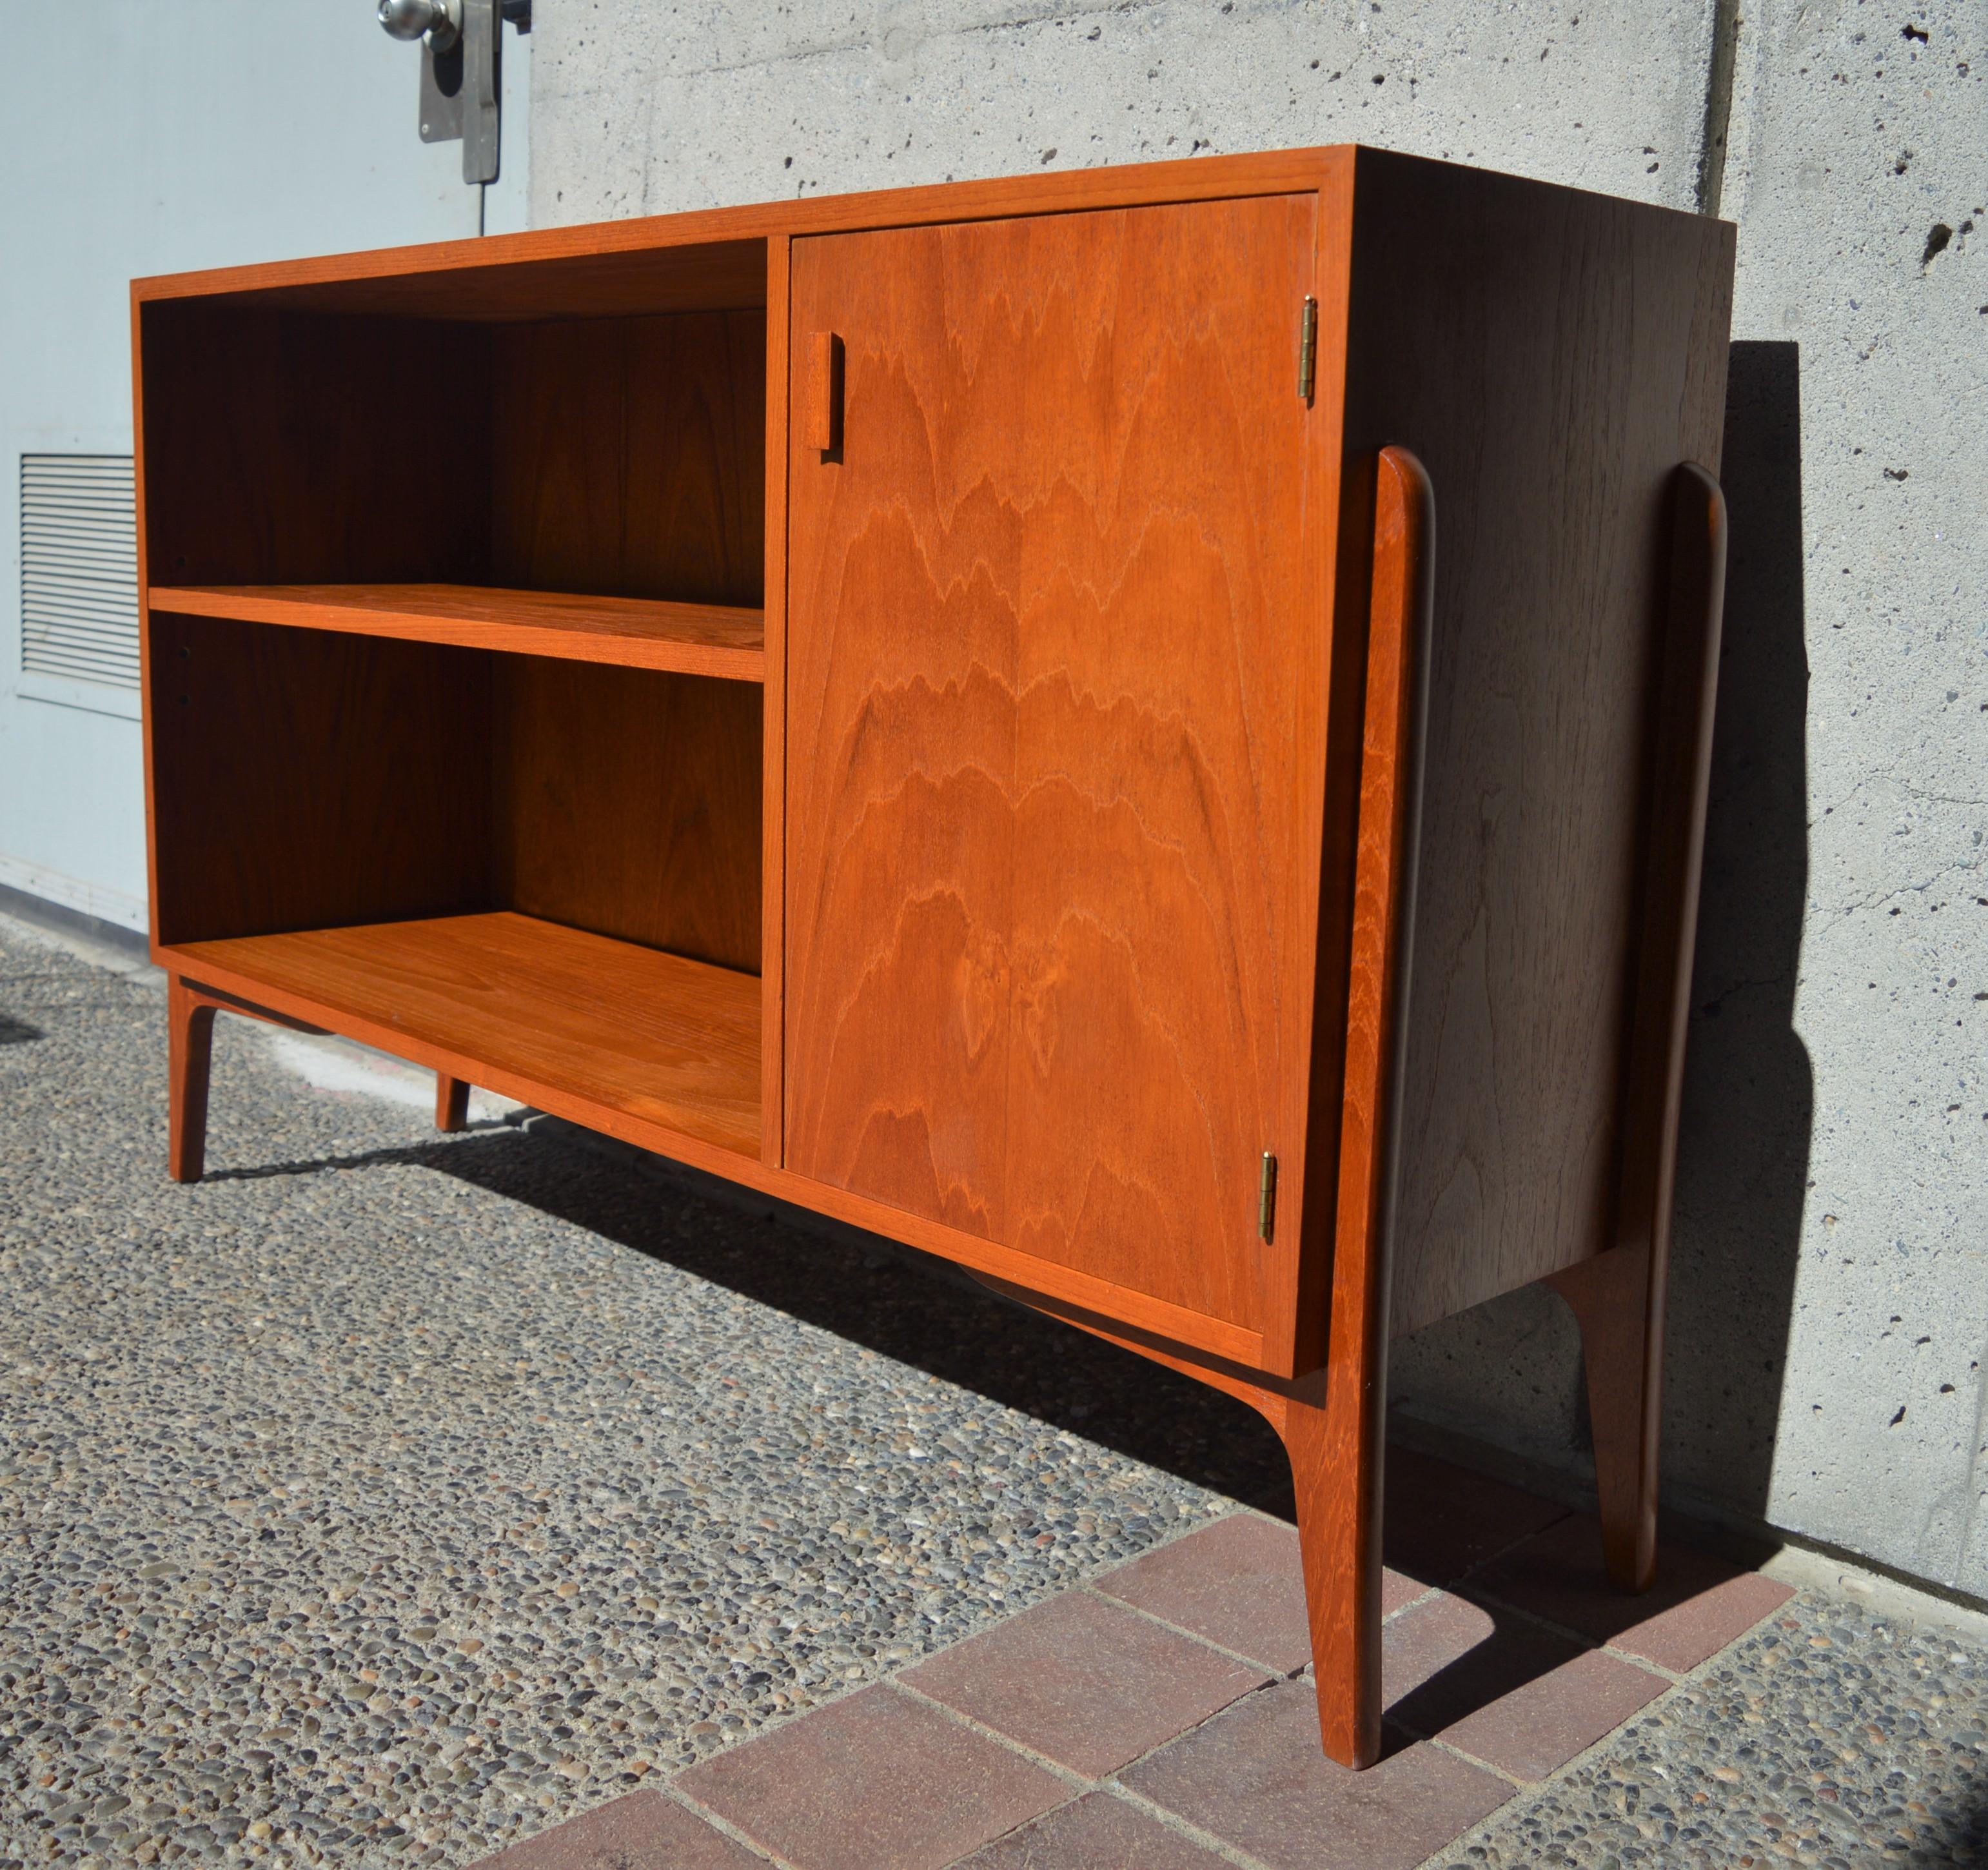 Mid-20th Century Danish Modern Teak Room Divider or Cabinet with Exposed Legs and Finished Back